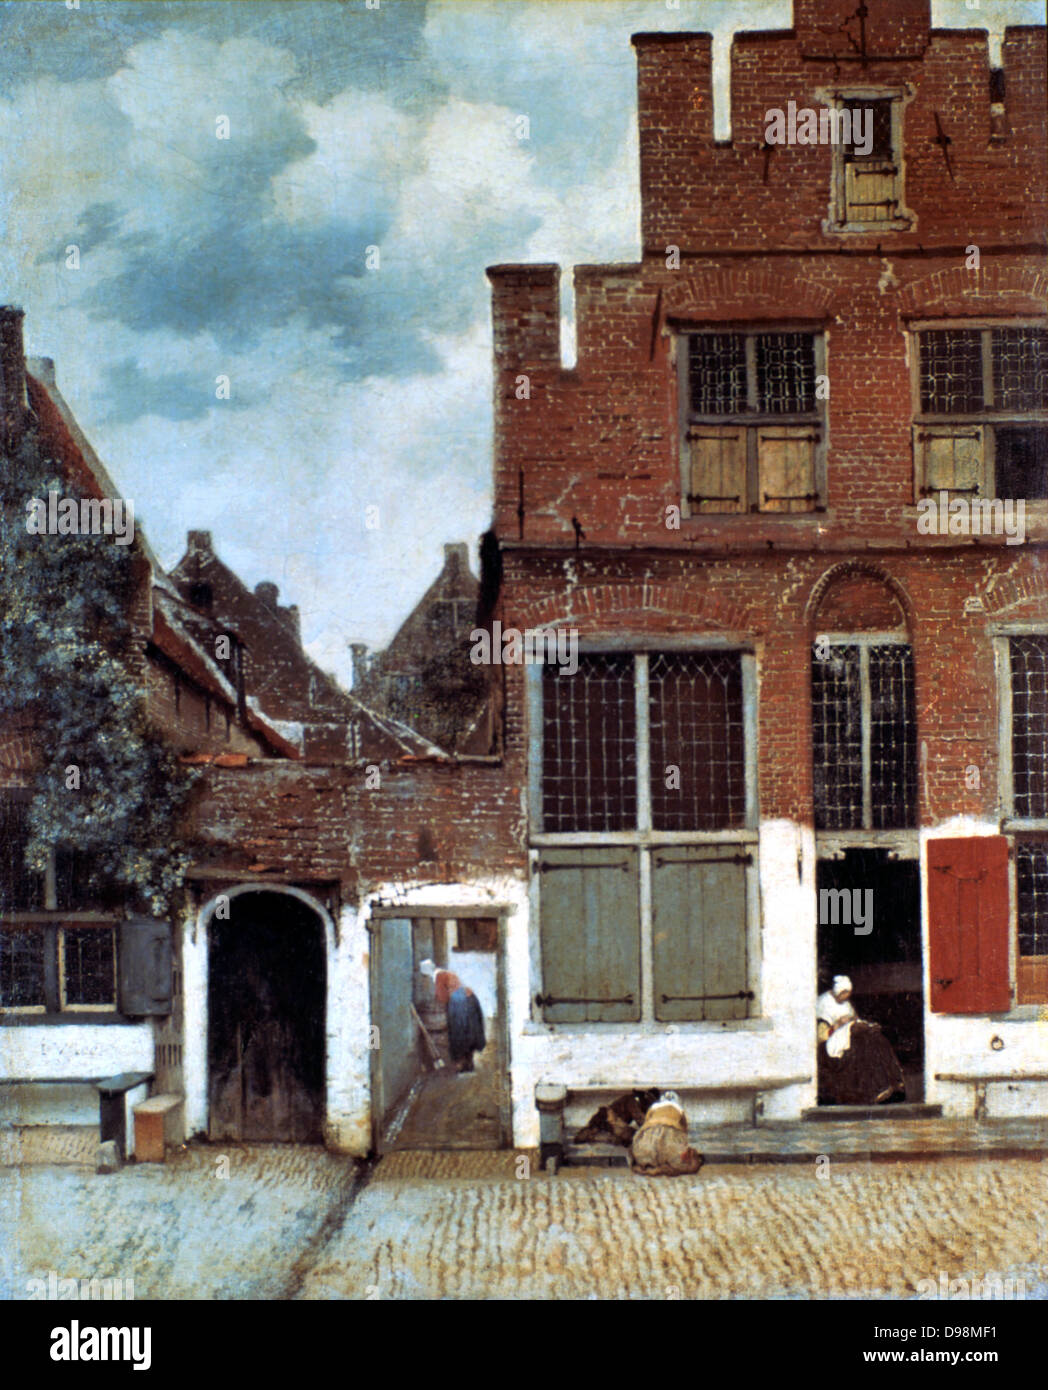 The Little Street' 1657-1658. Oil on Canvas. Jan Vermeer (1632-1675) Dutch Baroque painter. A view of a house standing in Delft. Dutch vernacular architecture and domestic activities. Glass Window Leaded-light Shutter Wood Metal Hinge Stock Photo